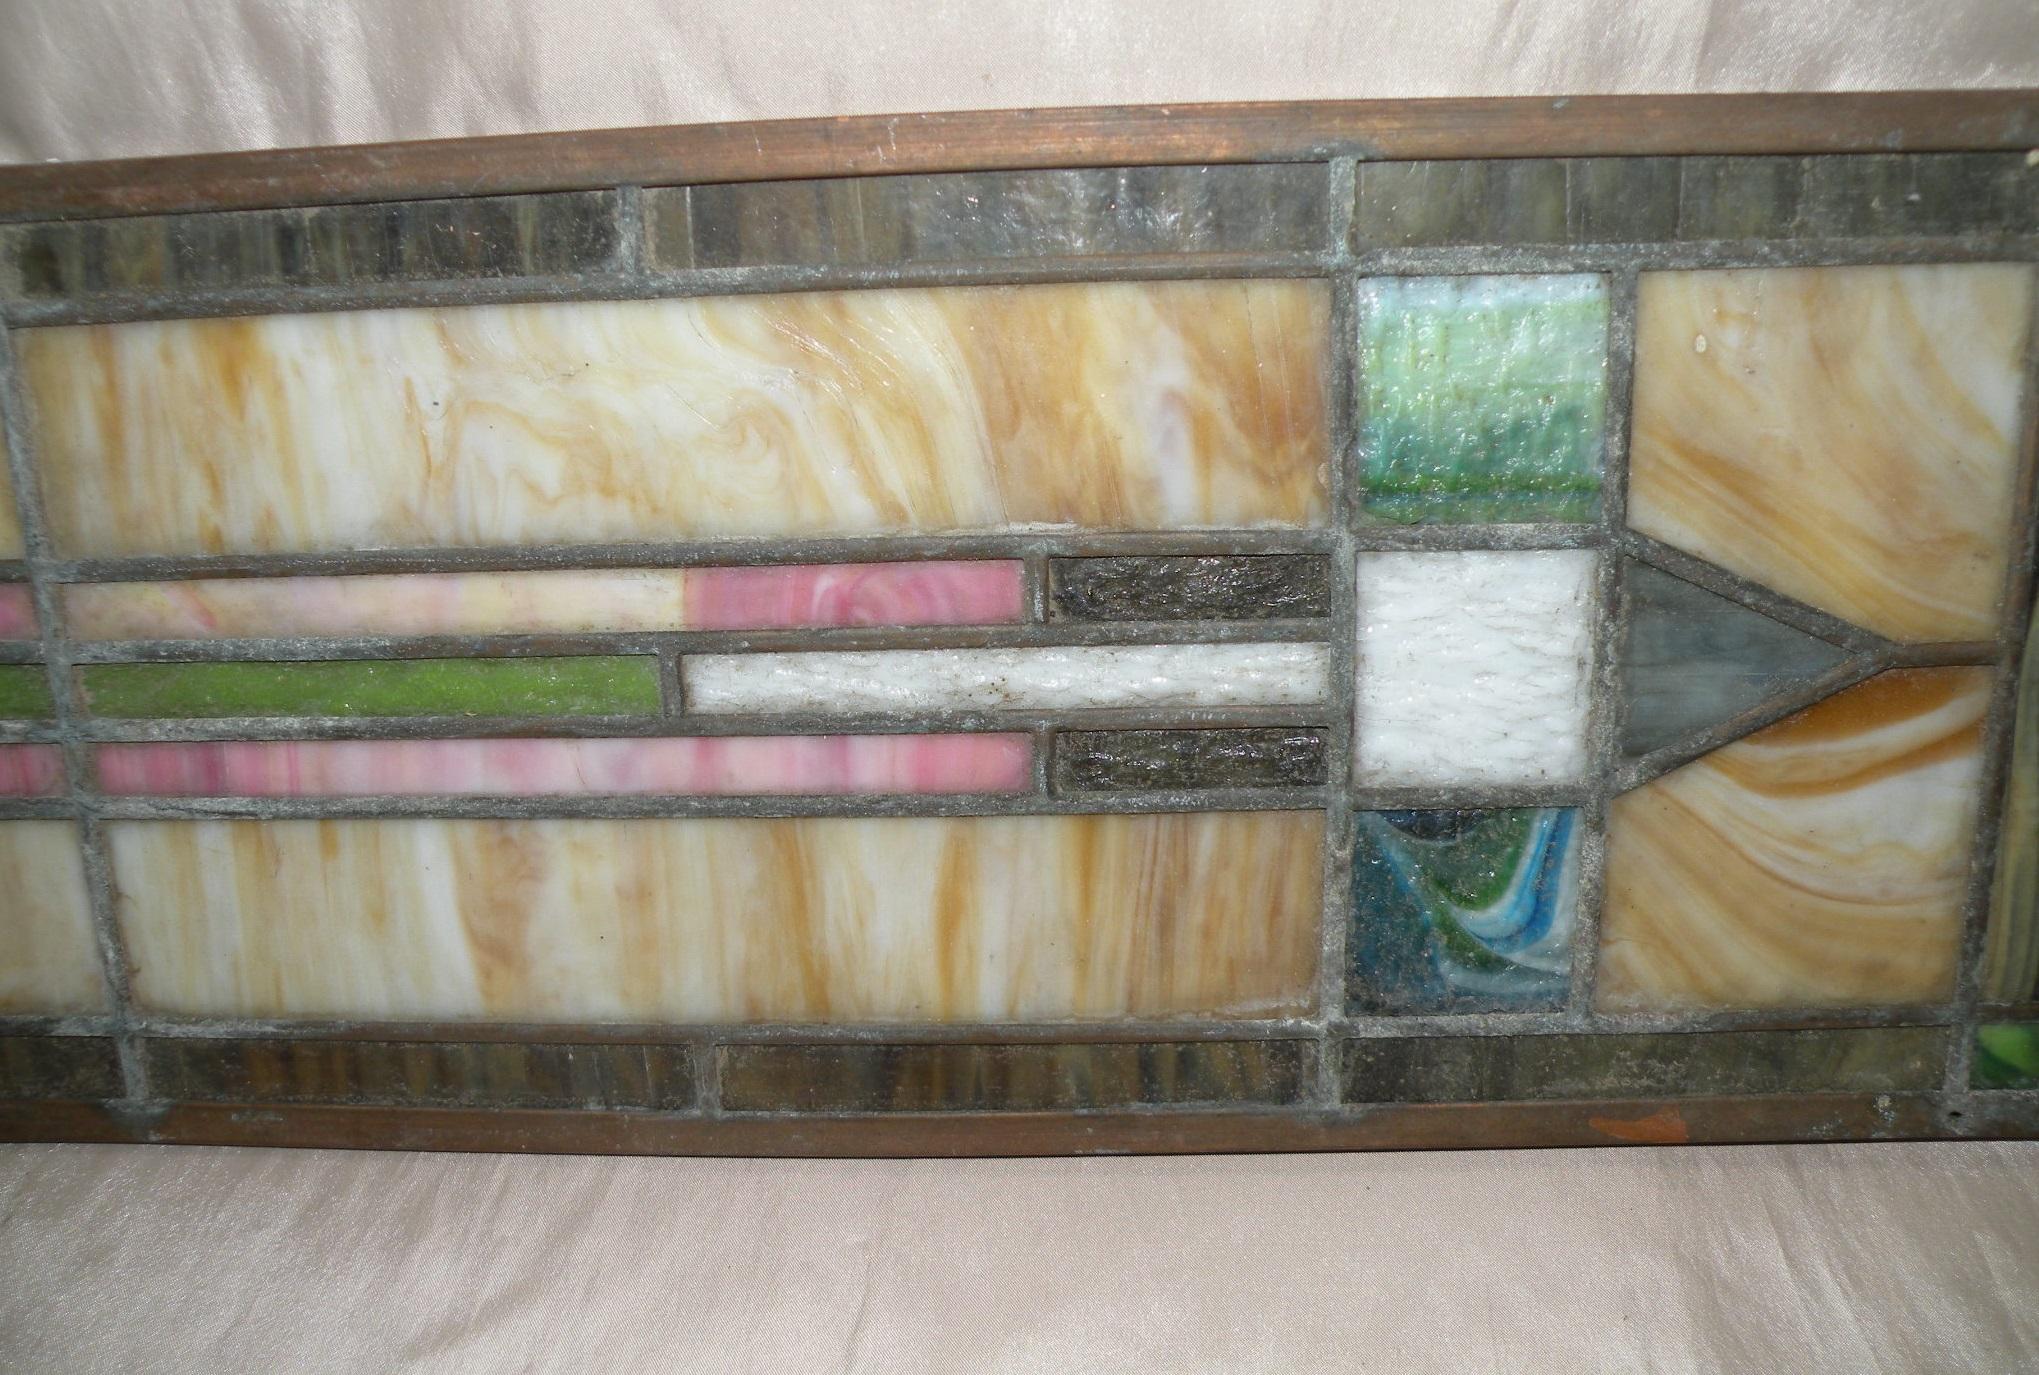 FRAMED STAINED GLASS WINDOW INSERT - WILL NOT SHIP